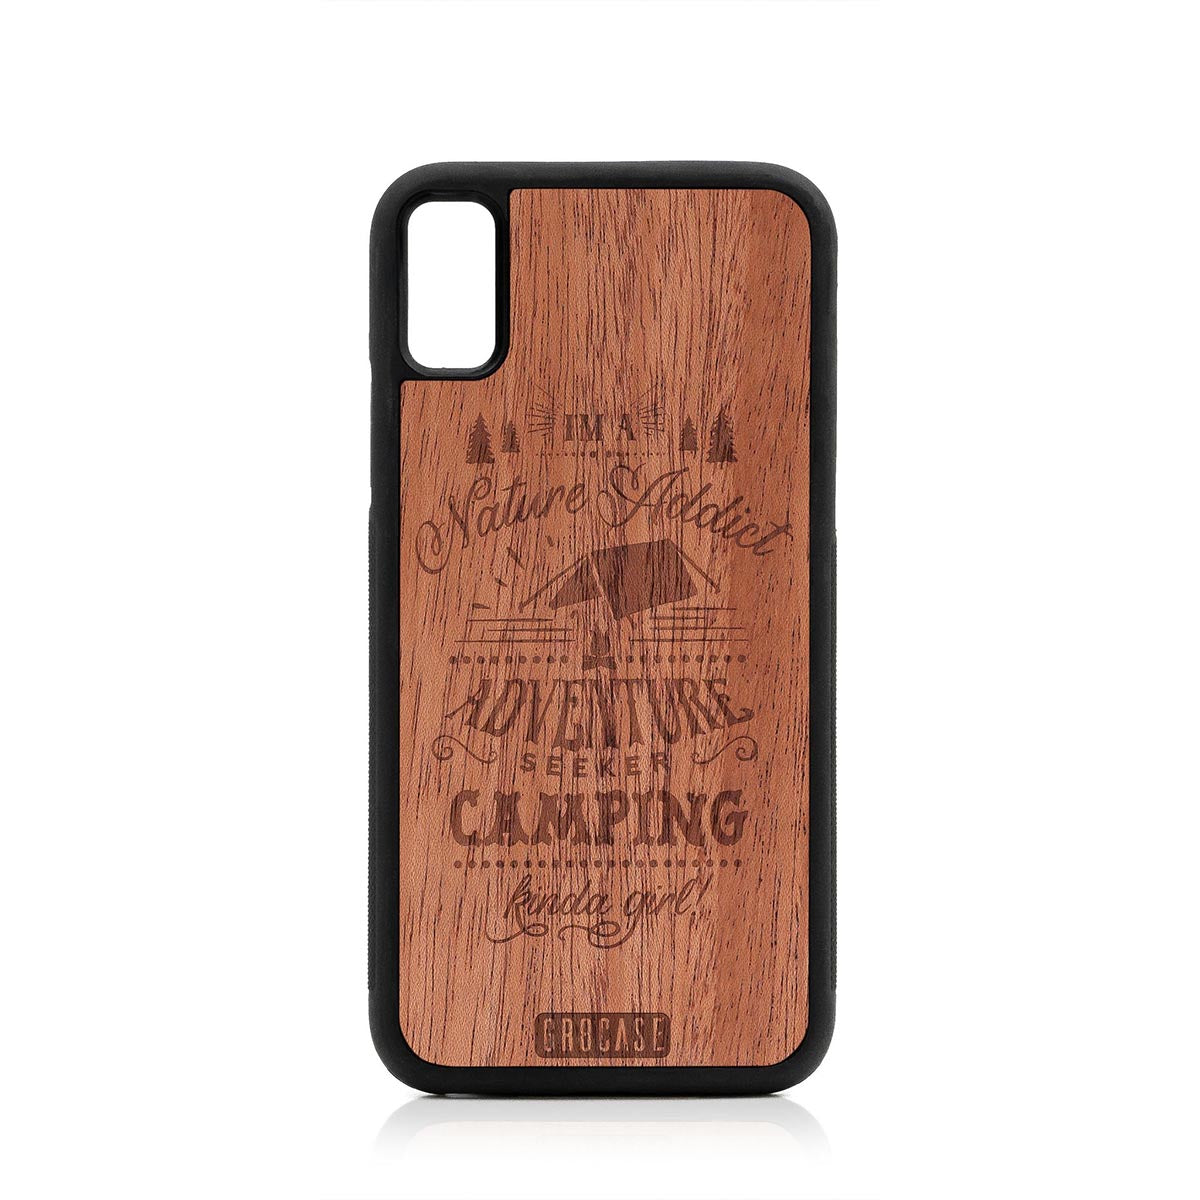 I'm A Nature Addict Adventure Seeker Camping Kinda Girl Design Wood Case For iPhone X/XS by GR8CASE